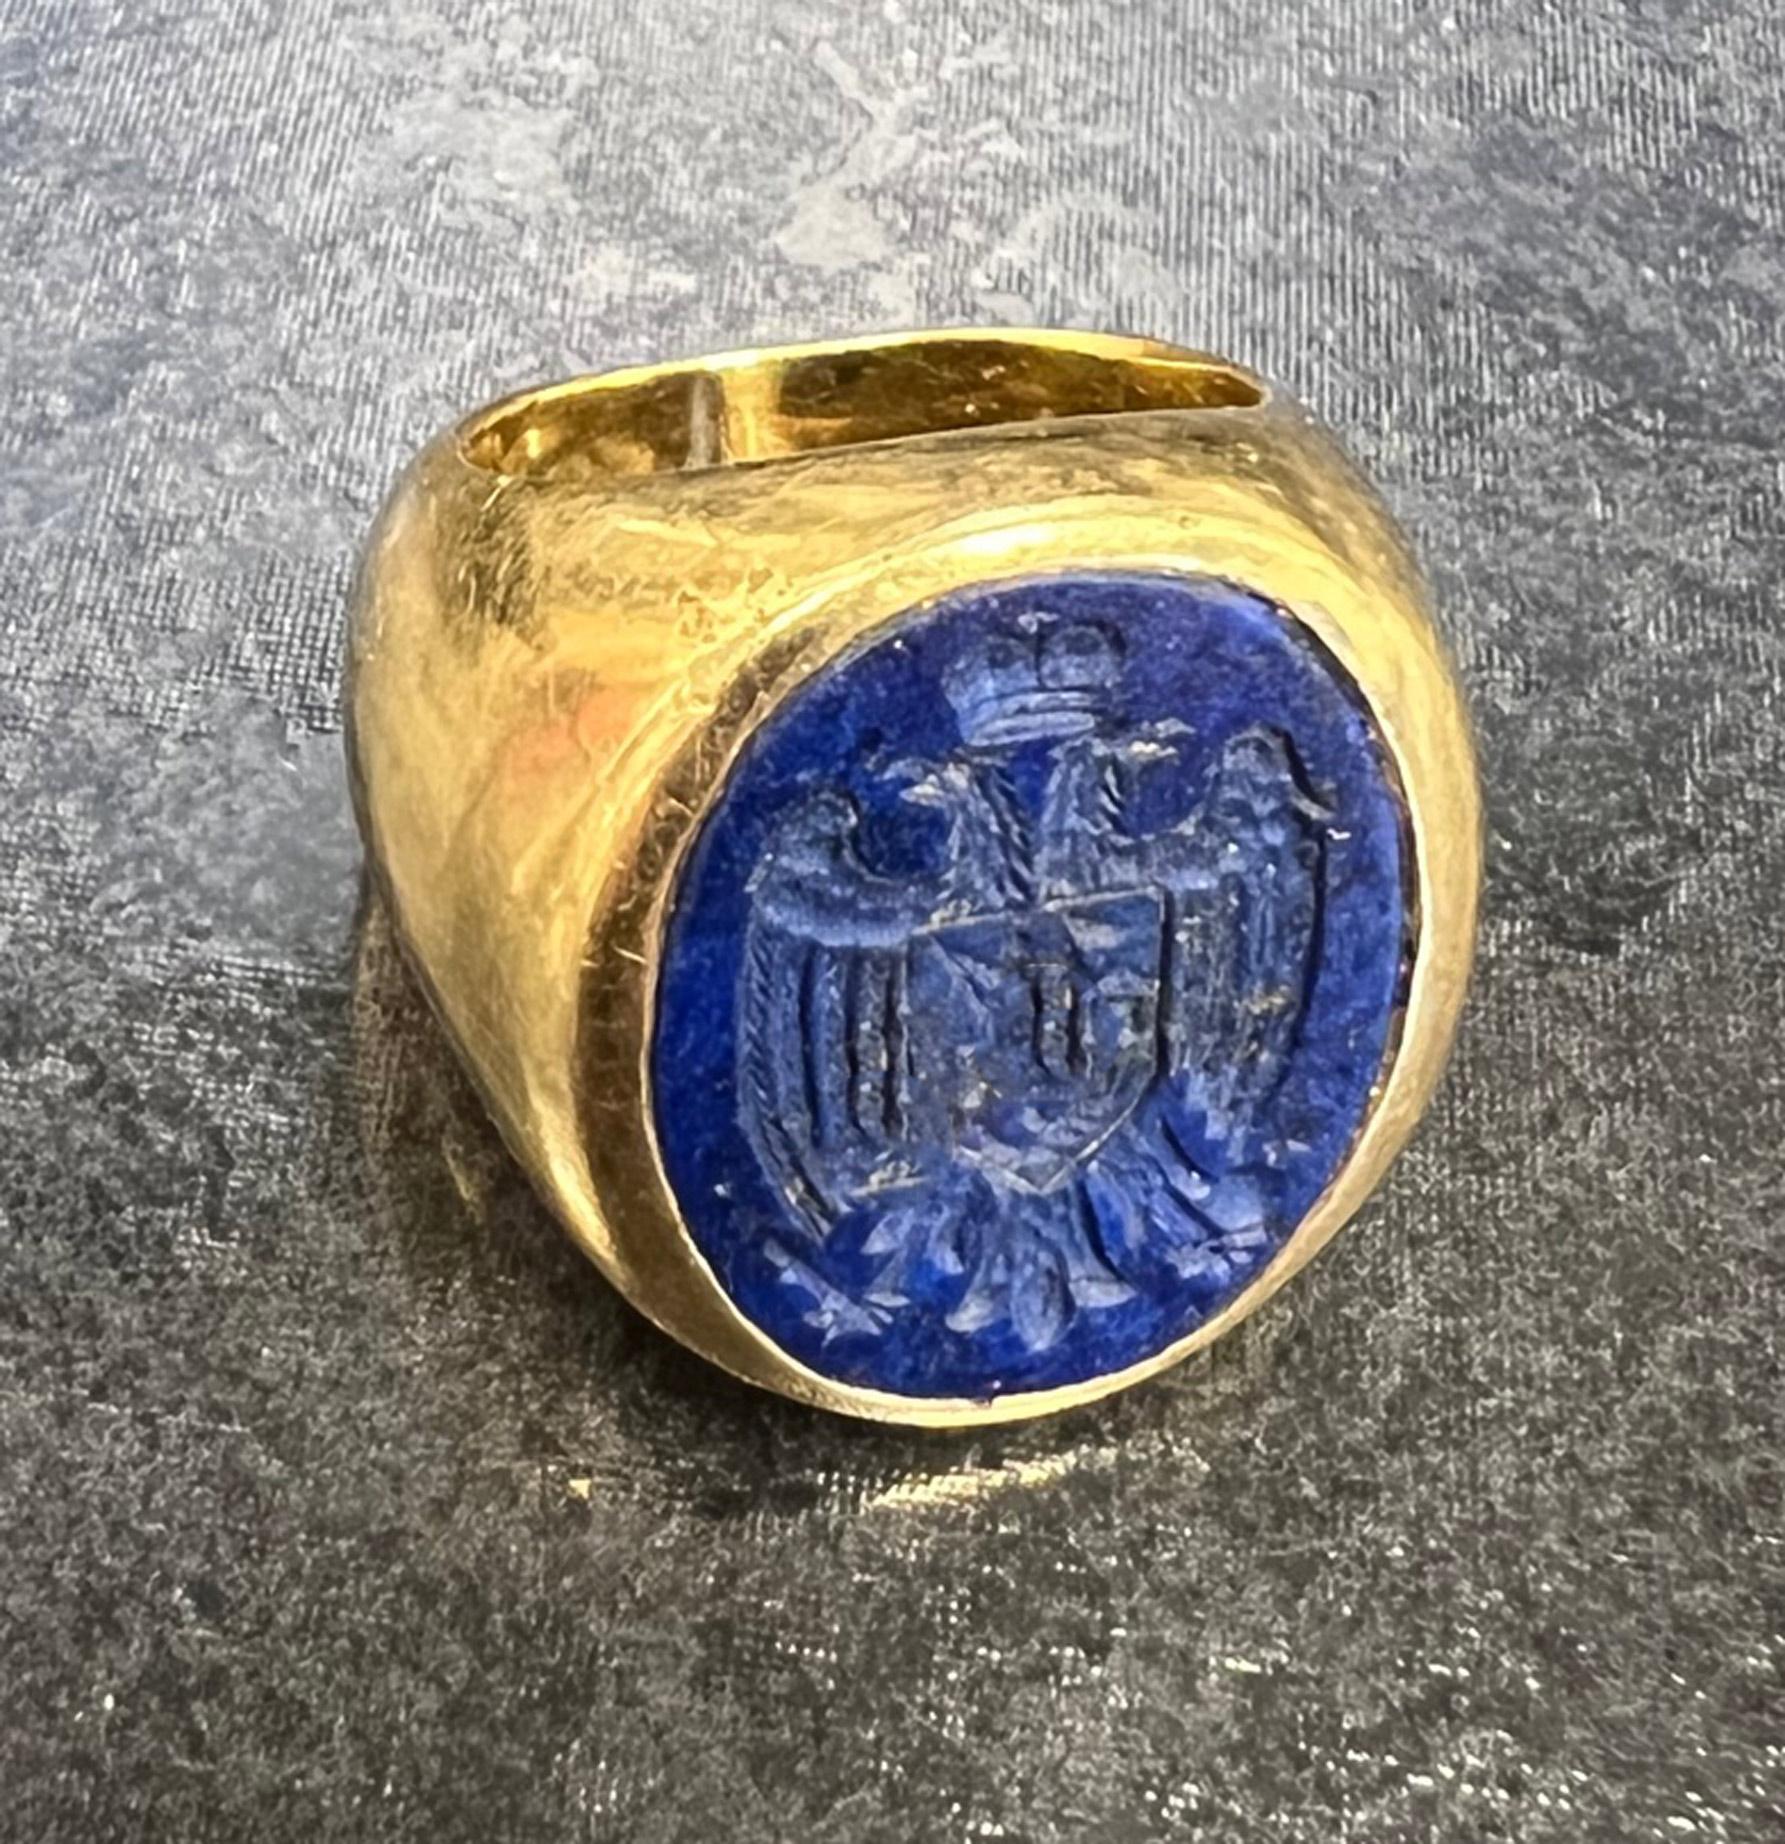 Unique turn of the century 18 karat gold lapis lazuli seal ring. The finely hand-engraved seal depicting the  Imperial Russian seal,  depicts 2 eagles with a crown over them, an emblem of knight on a horse in the center and a cross and scepter in